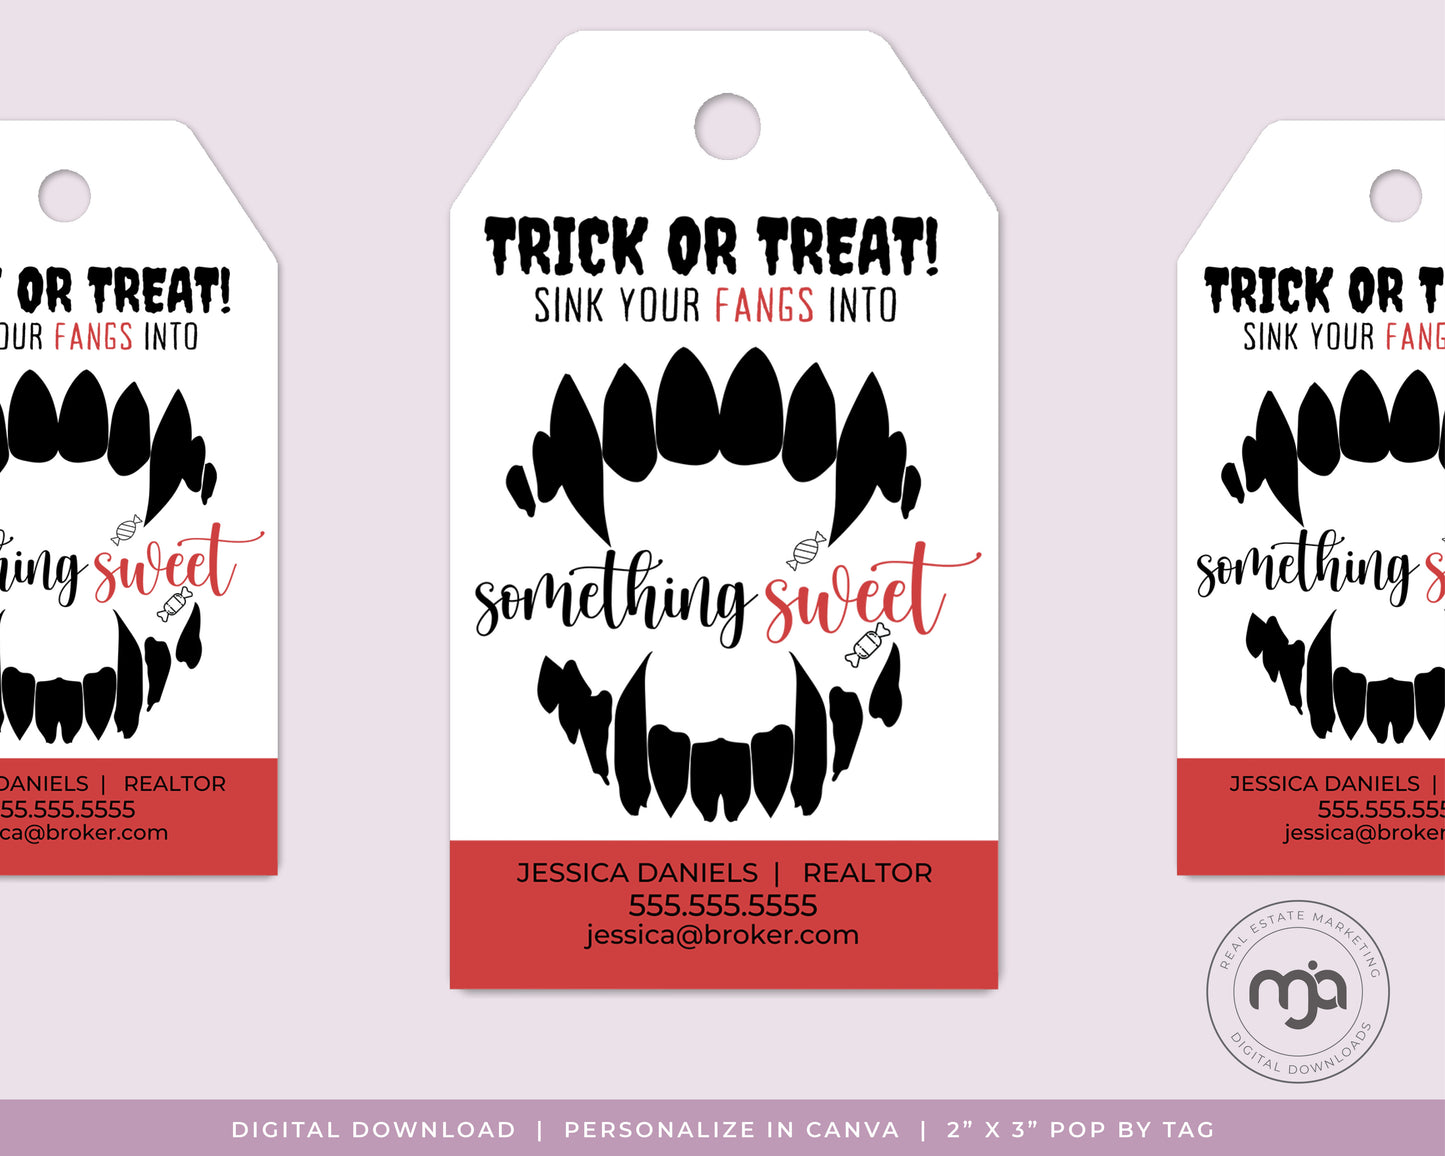 Sink Your Fangs Into Something Sweet - Pop By Gift Tag